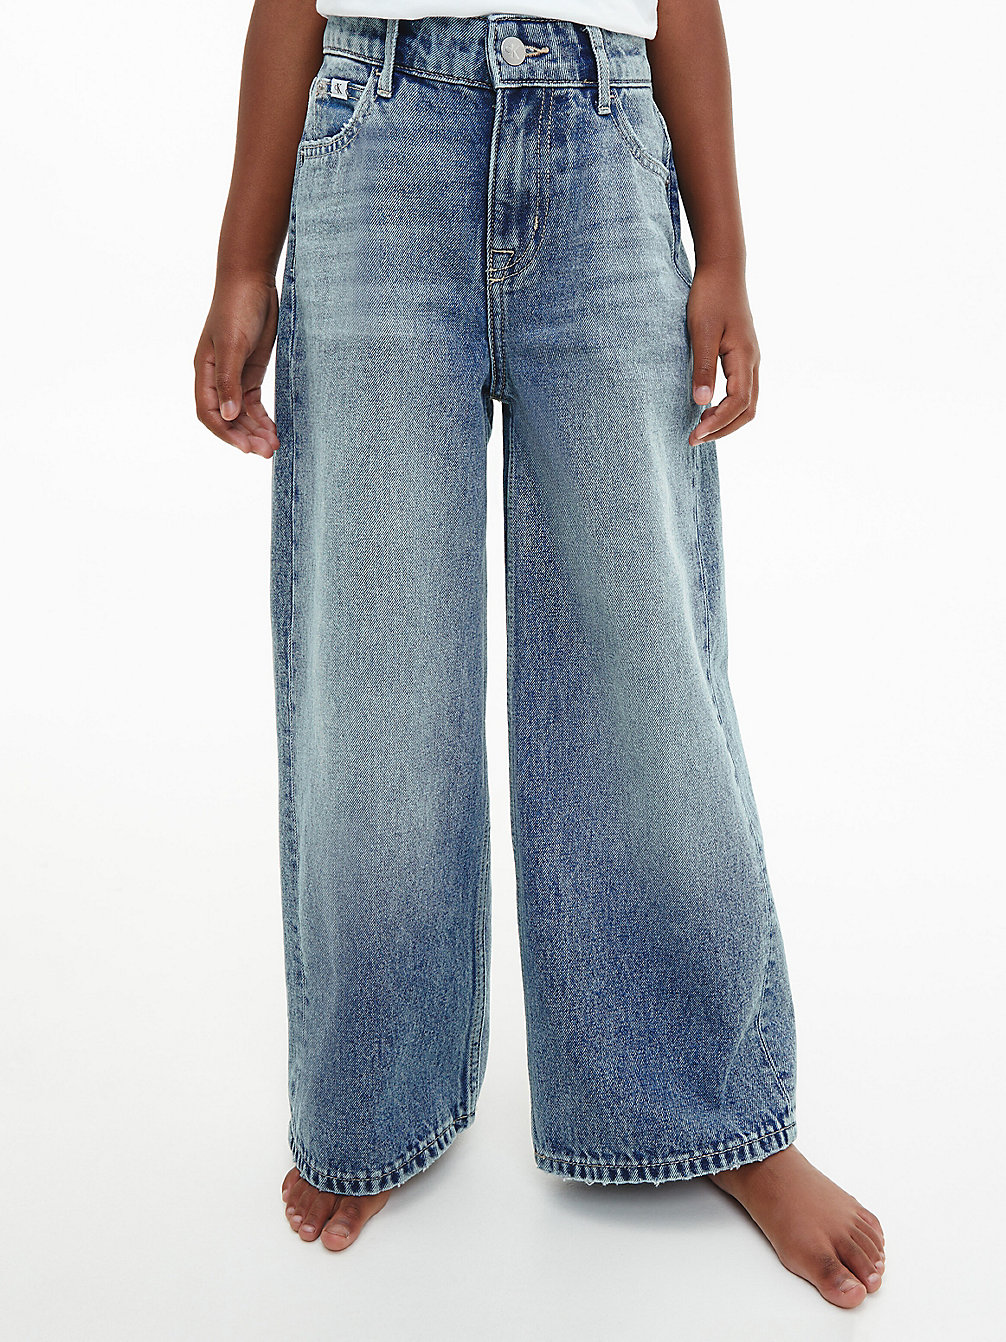 VISUAL LIGHT BLUE Extreme Wide Leg Jeans undefined bambina Calvin Klein